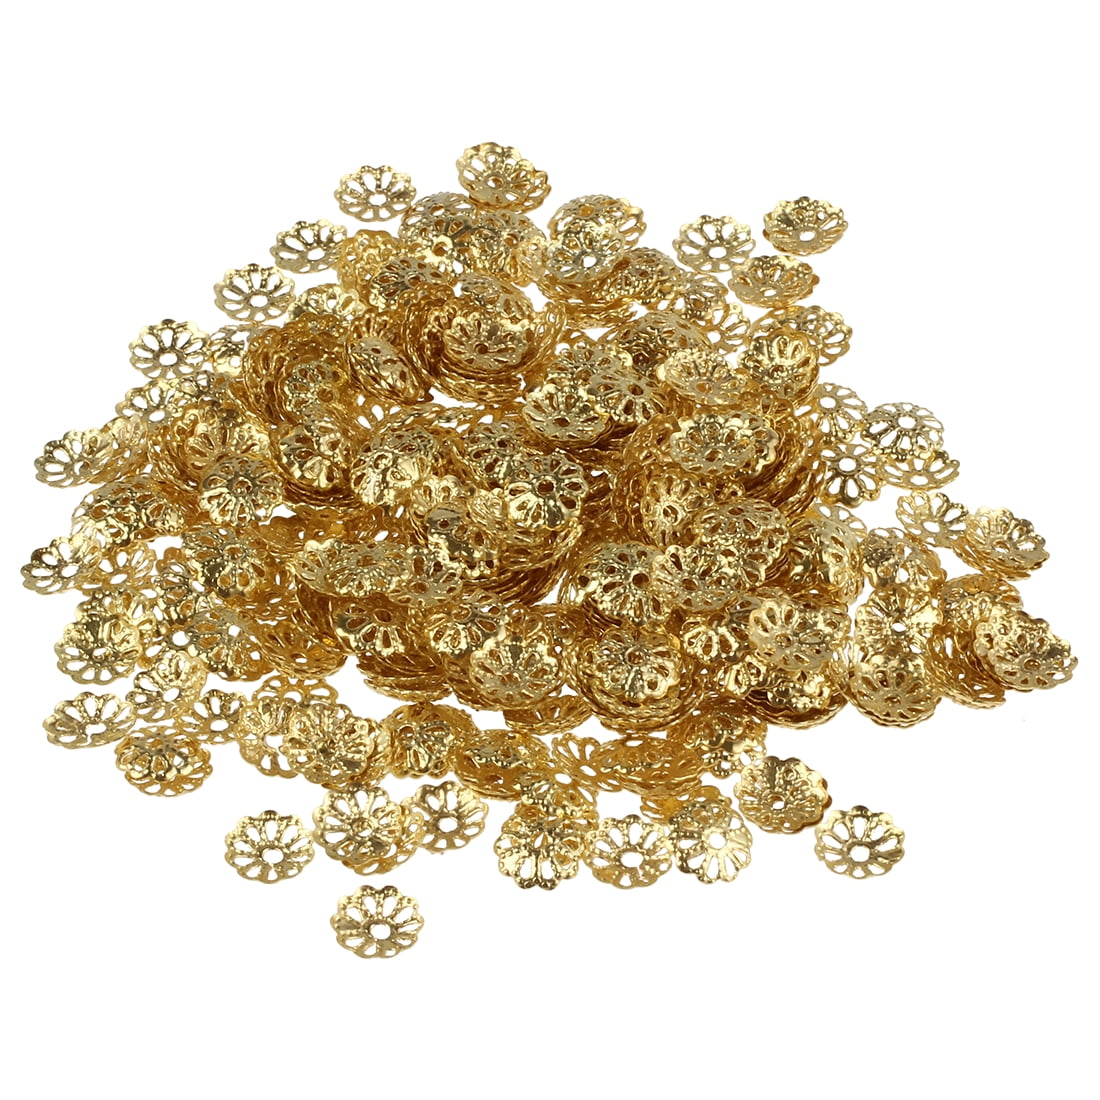 Wholesale 500PCS Gold /Silver Plated Flower Bead Caps Jewelry Making 6MM New 